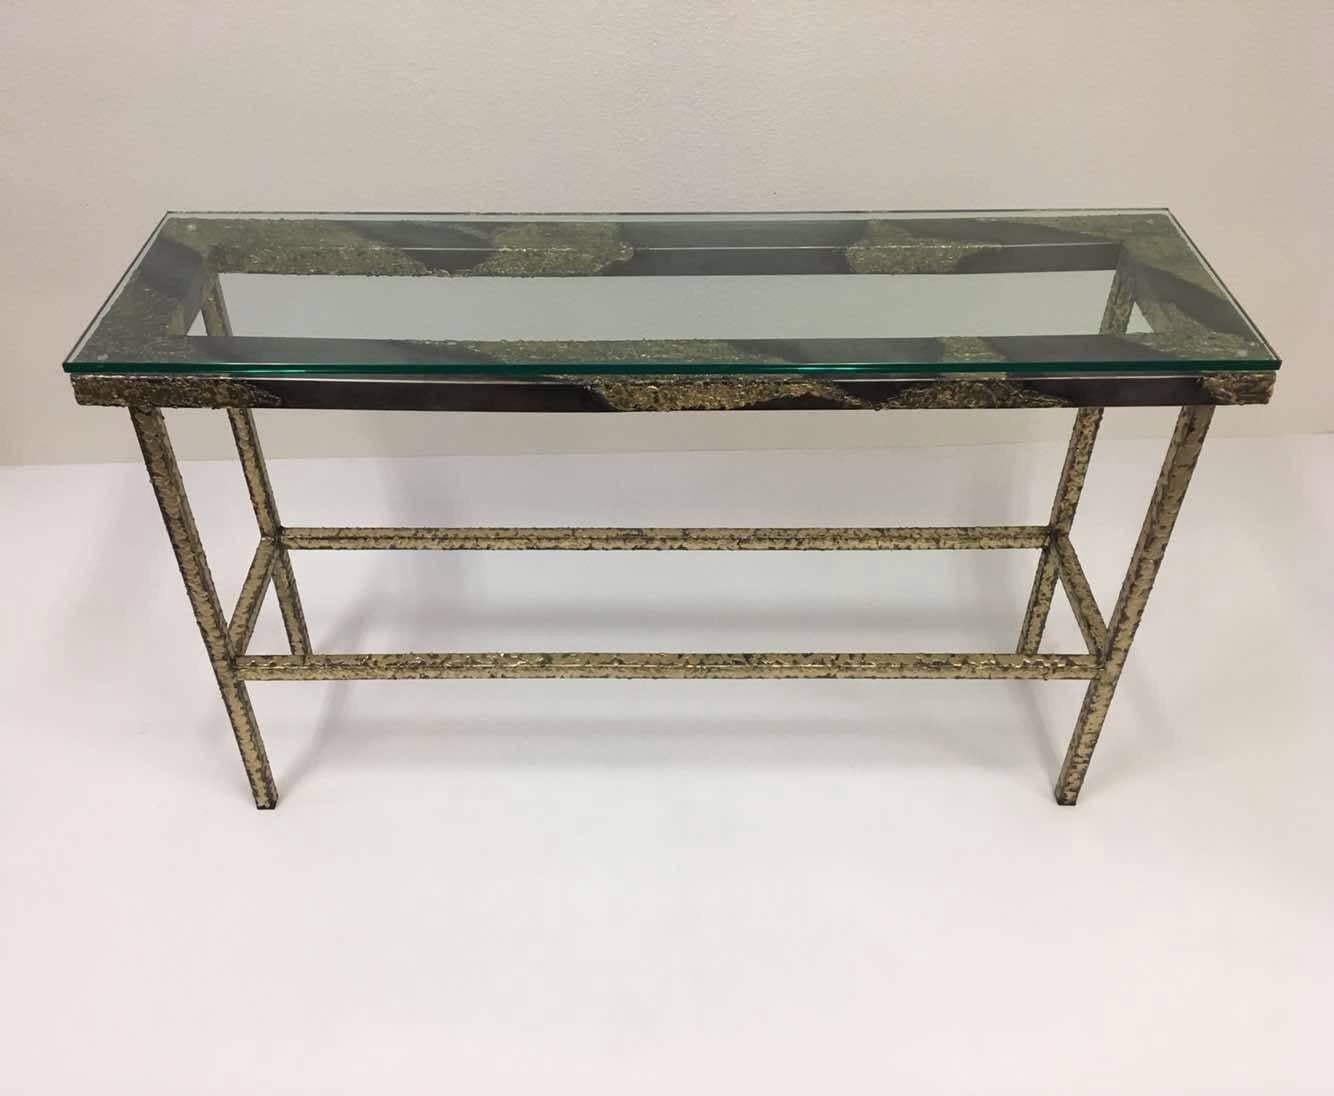 A beautiful studio Brutalist console table designed by American Sculptor John De La Rosa. The table is constructed of steel and brass with a .5 inches thick glass top.
Dimensions: 49 inches wide, 14.5 inches deep, 30 inches high.